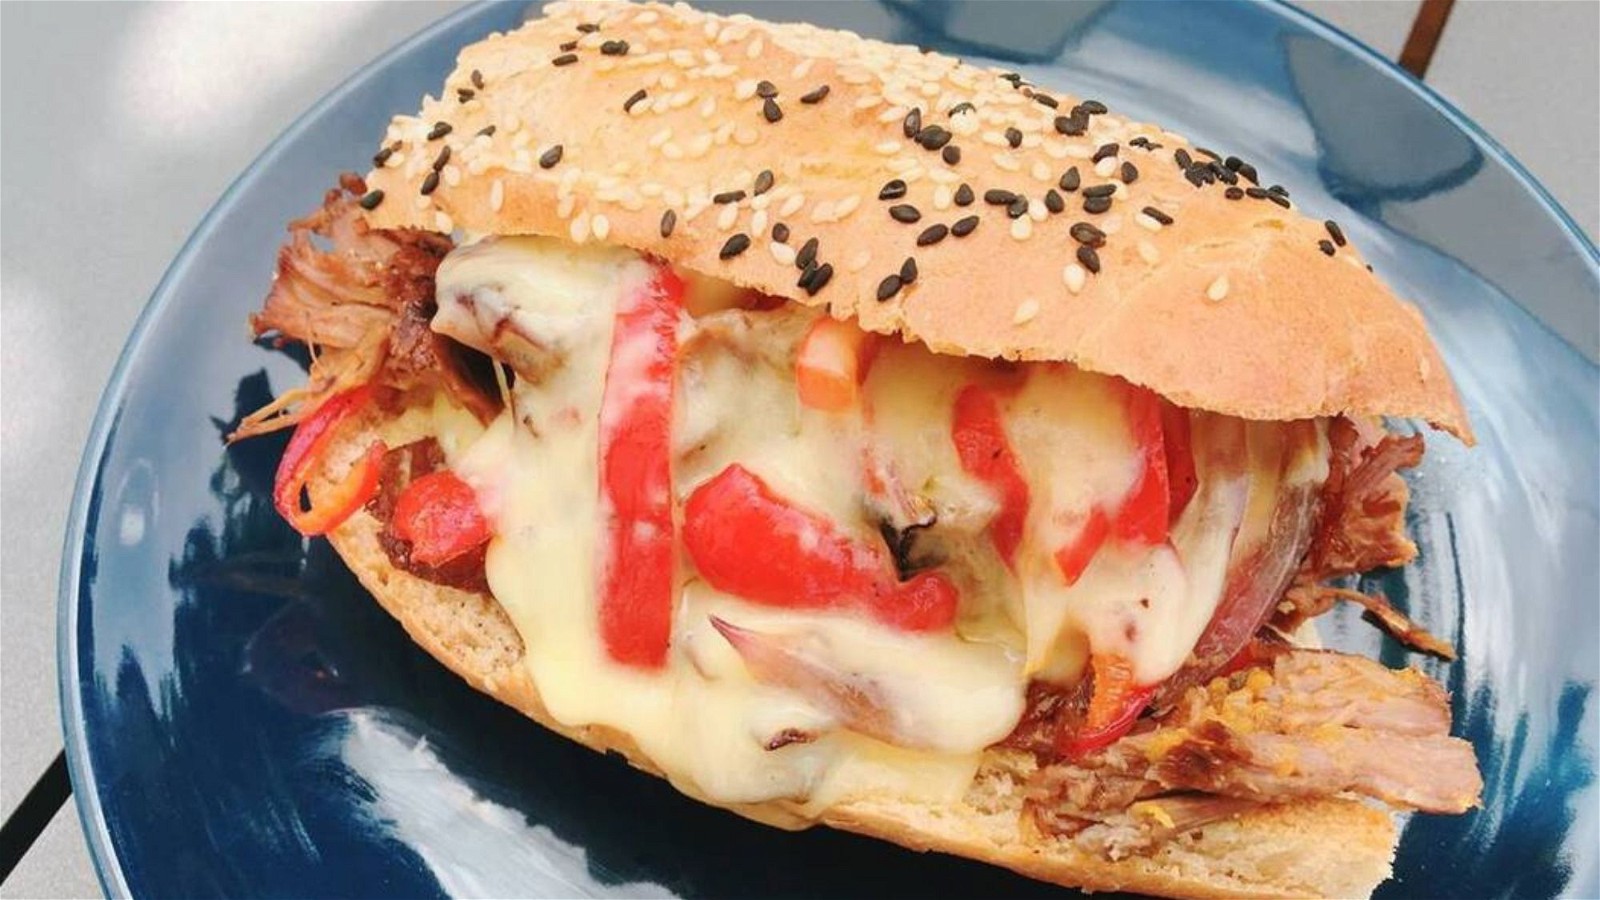 Image of Smoked Philly Goat Sandwich